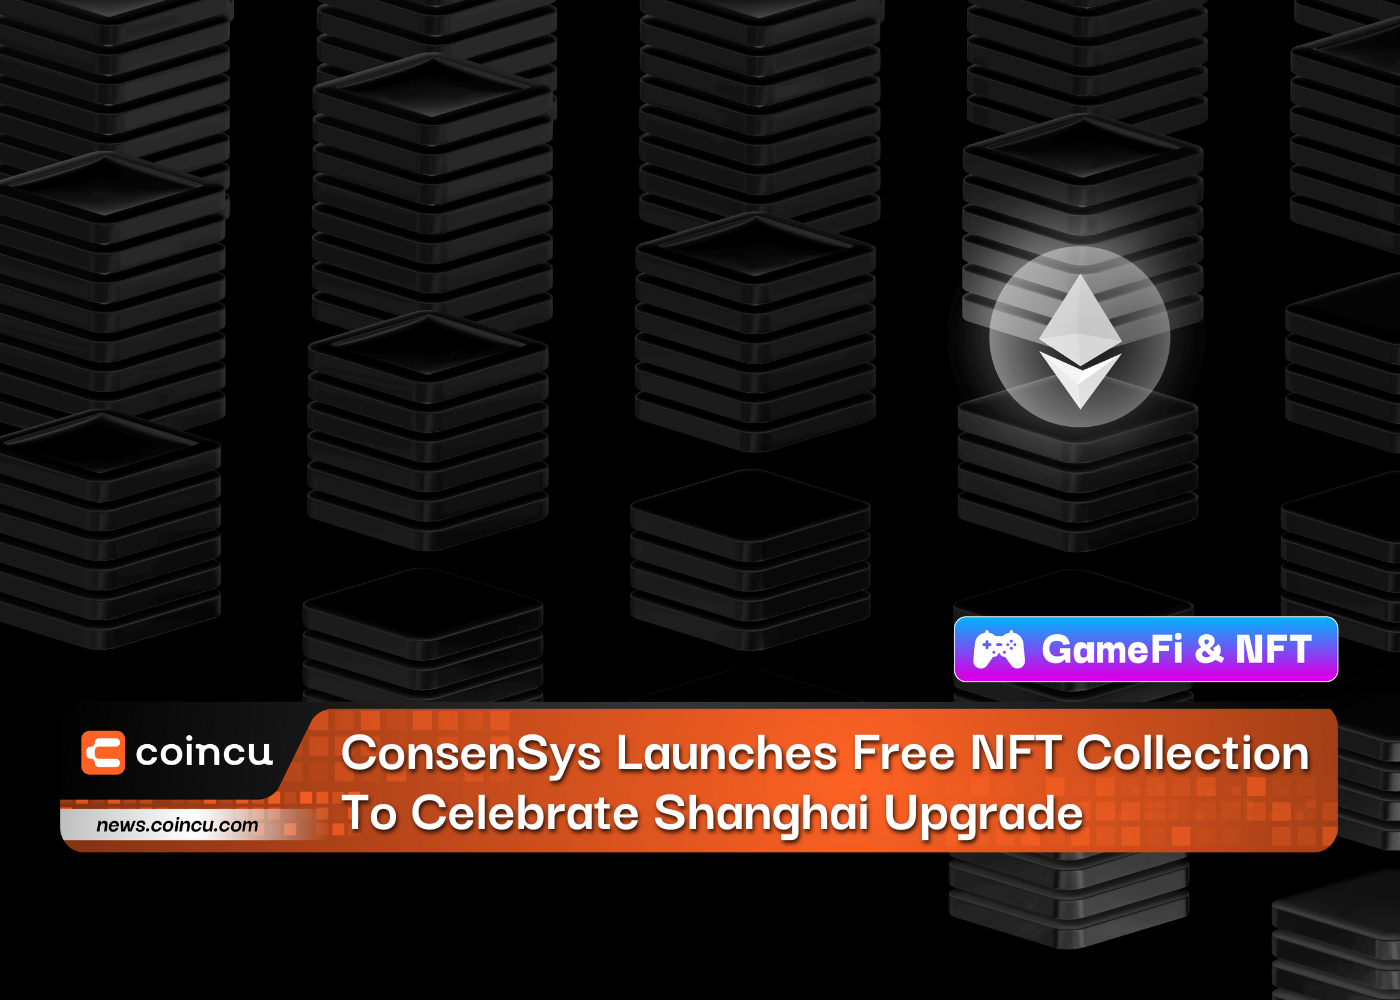 ConsenSys Launches Free NFT Collection To Celebrate Shanghai Upgrade